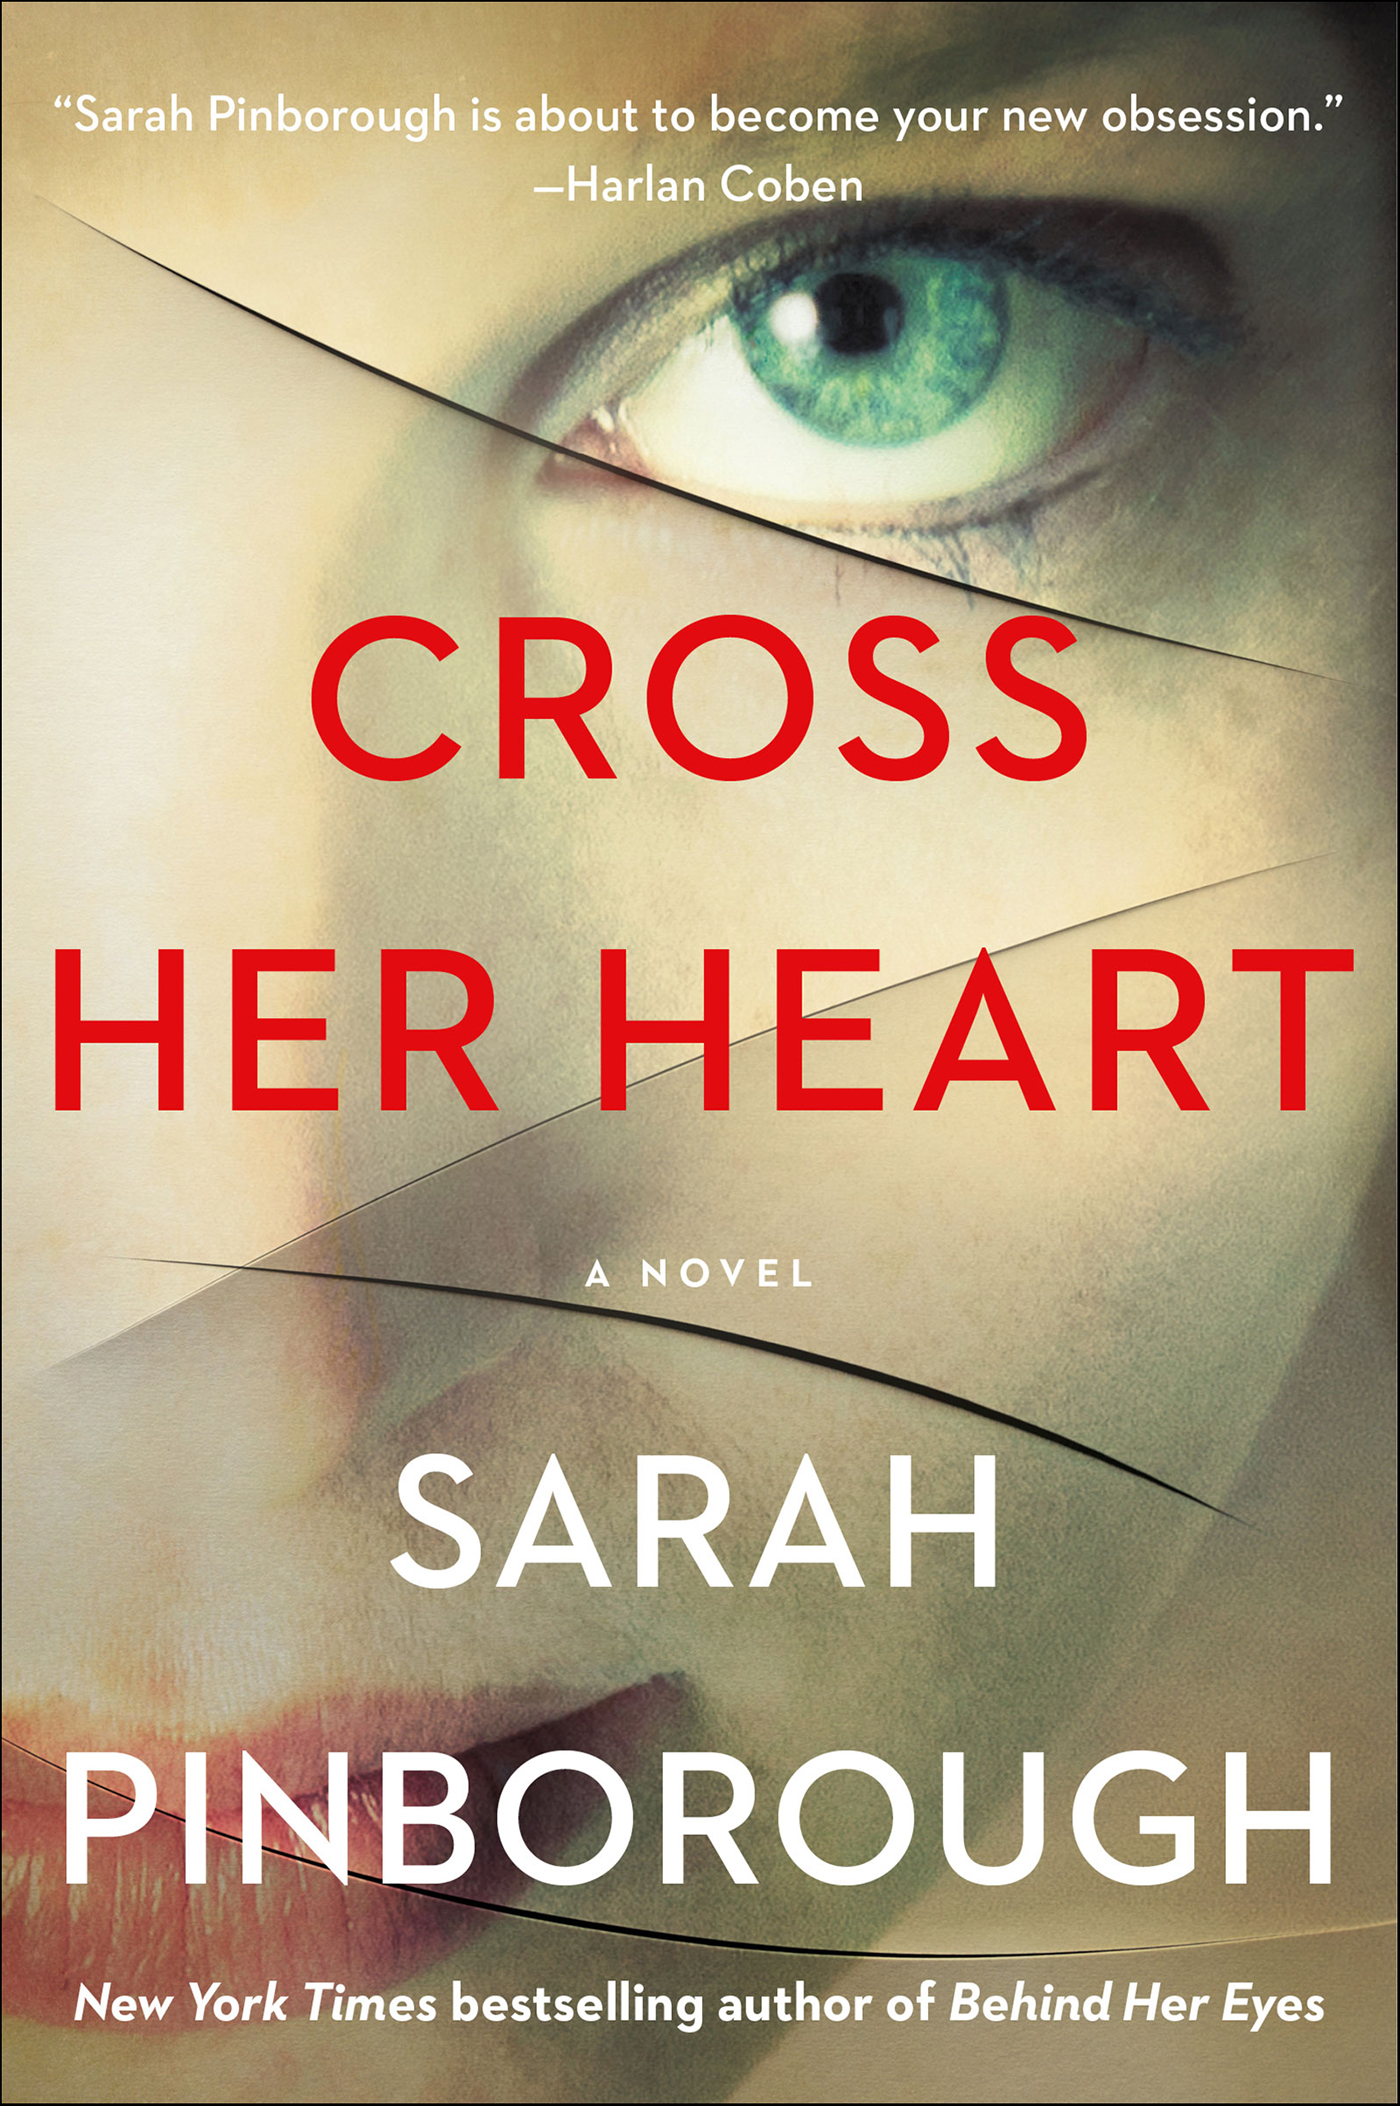 Cross her heart cover image